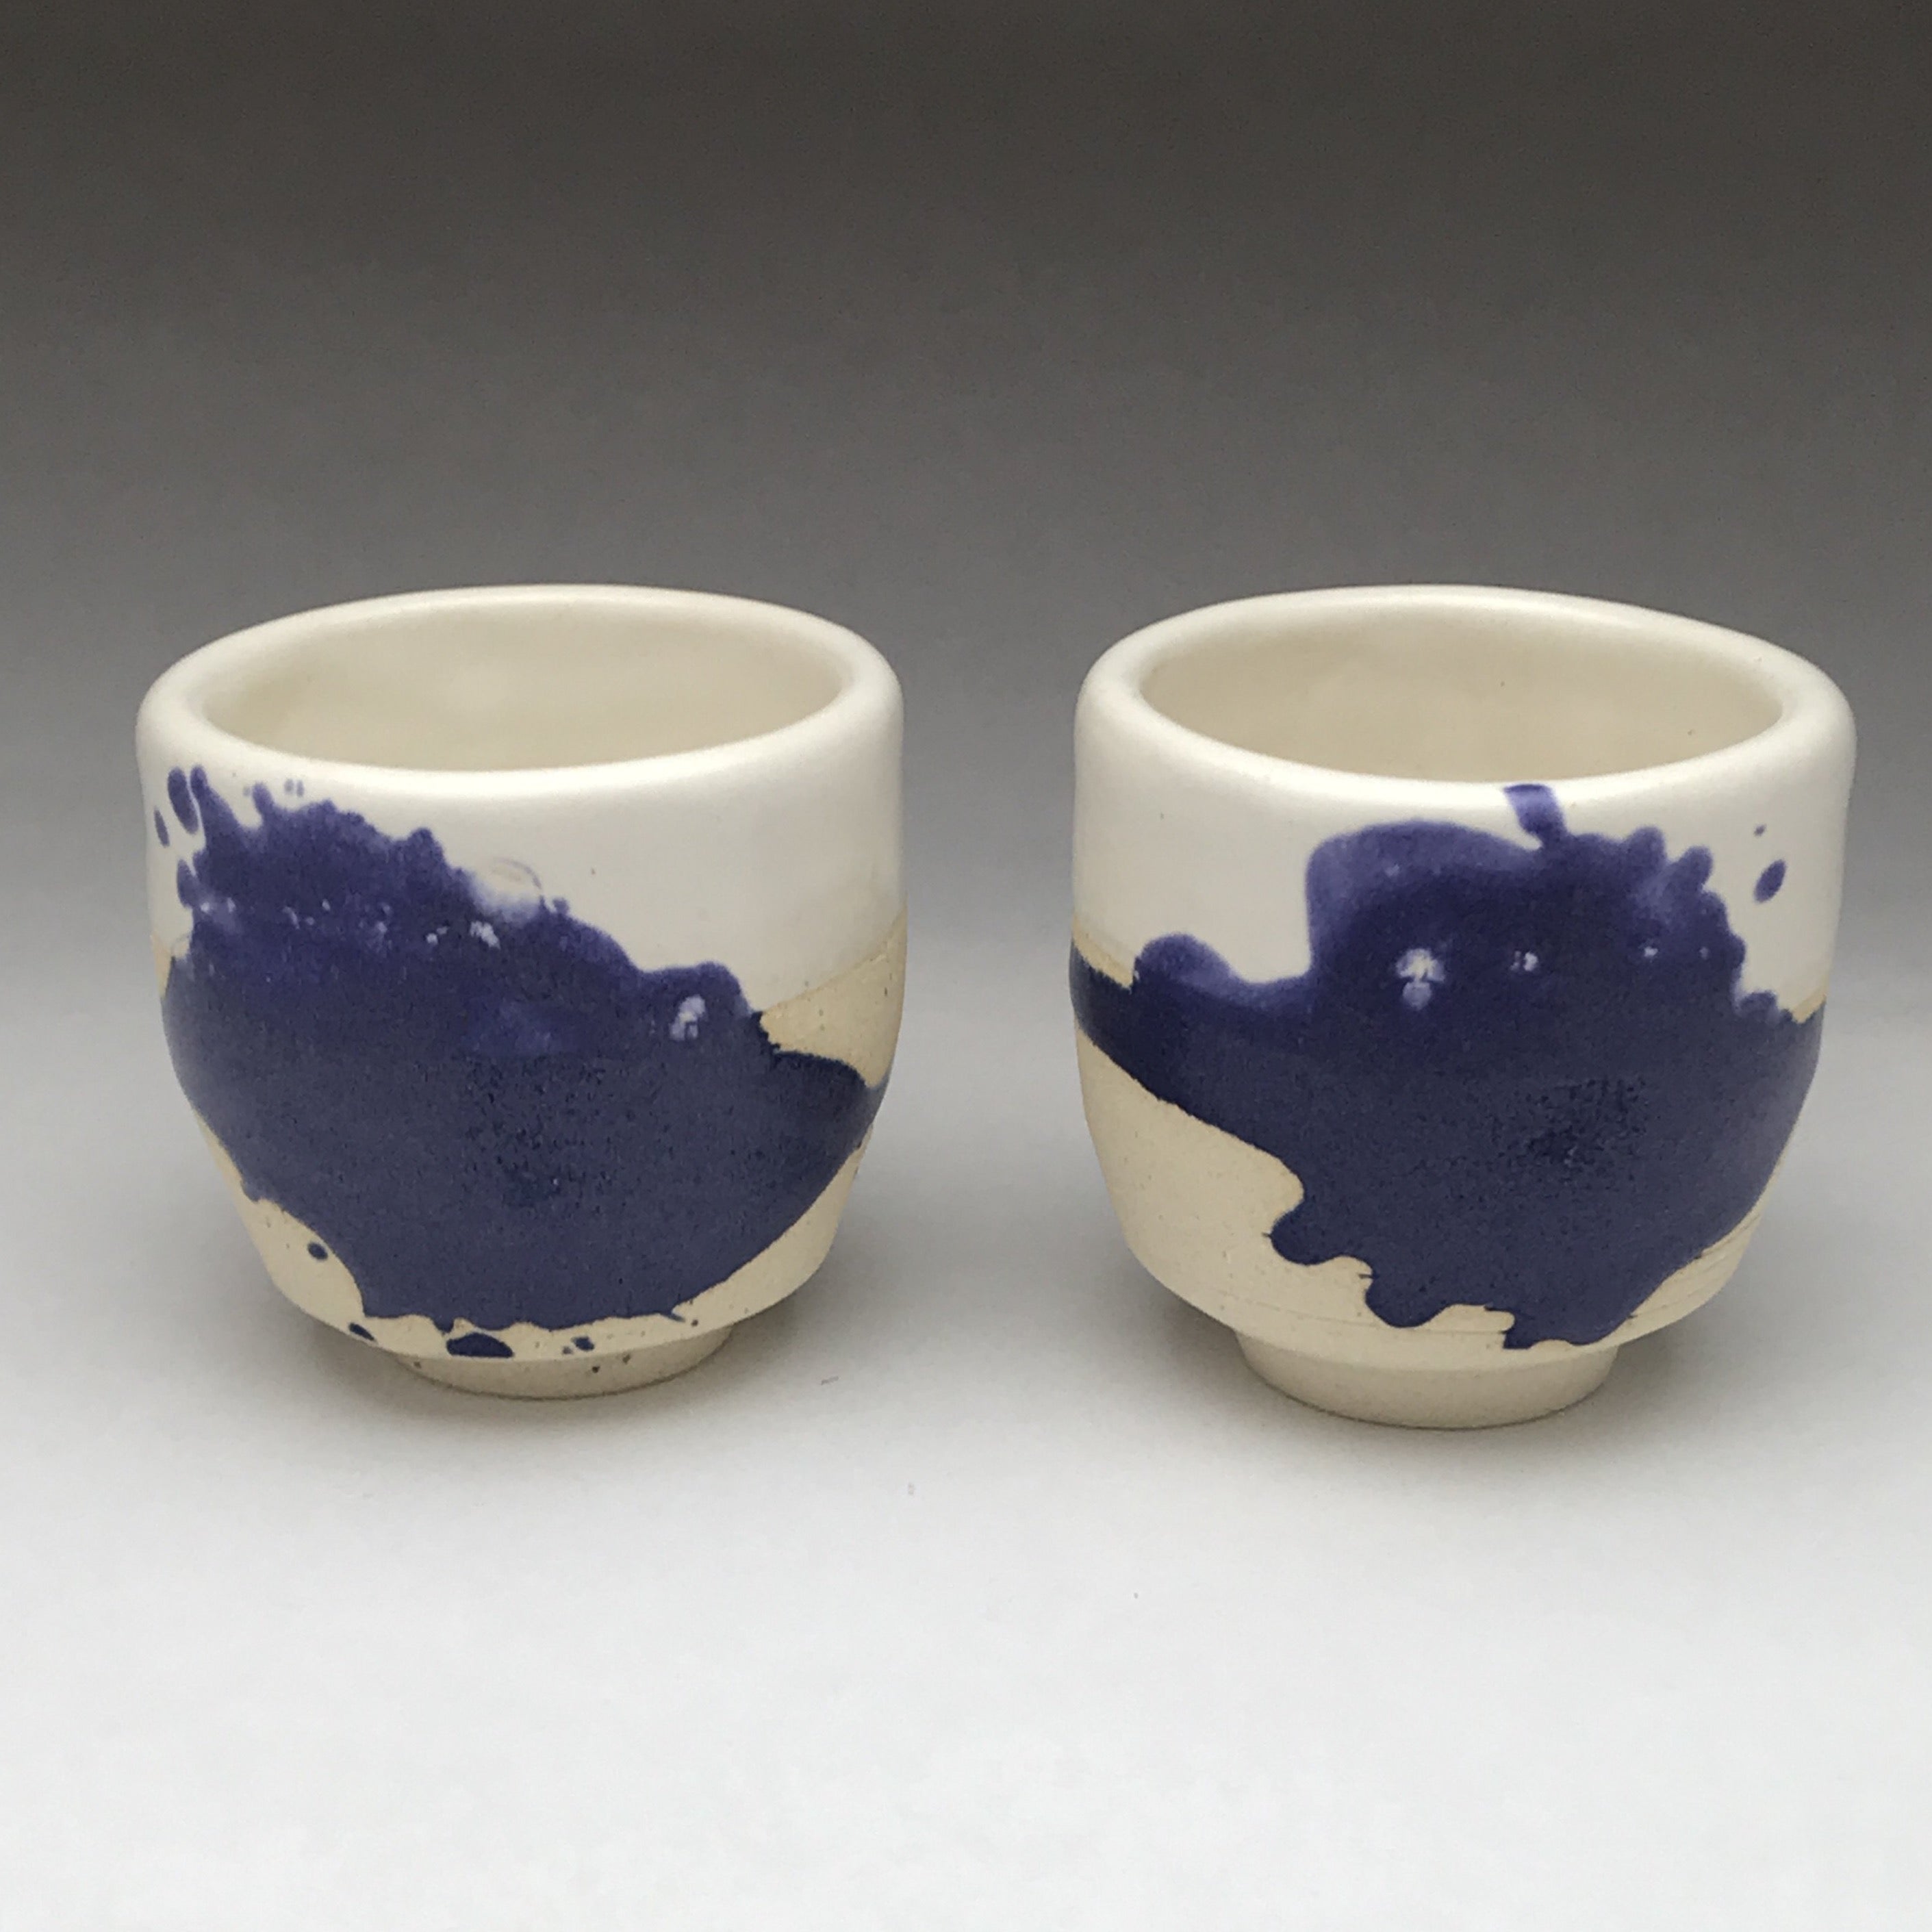 yunomi tea cup whiskey sipper with cobalt blue and white drippy design